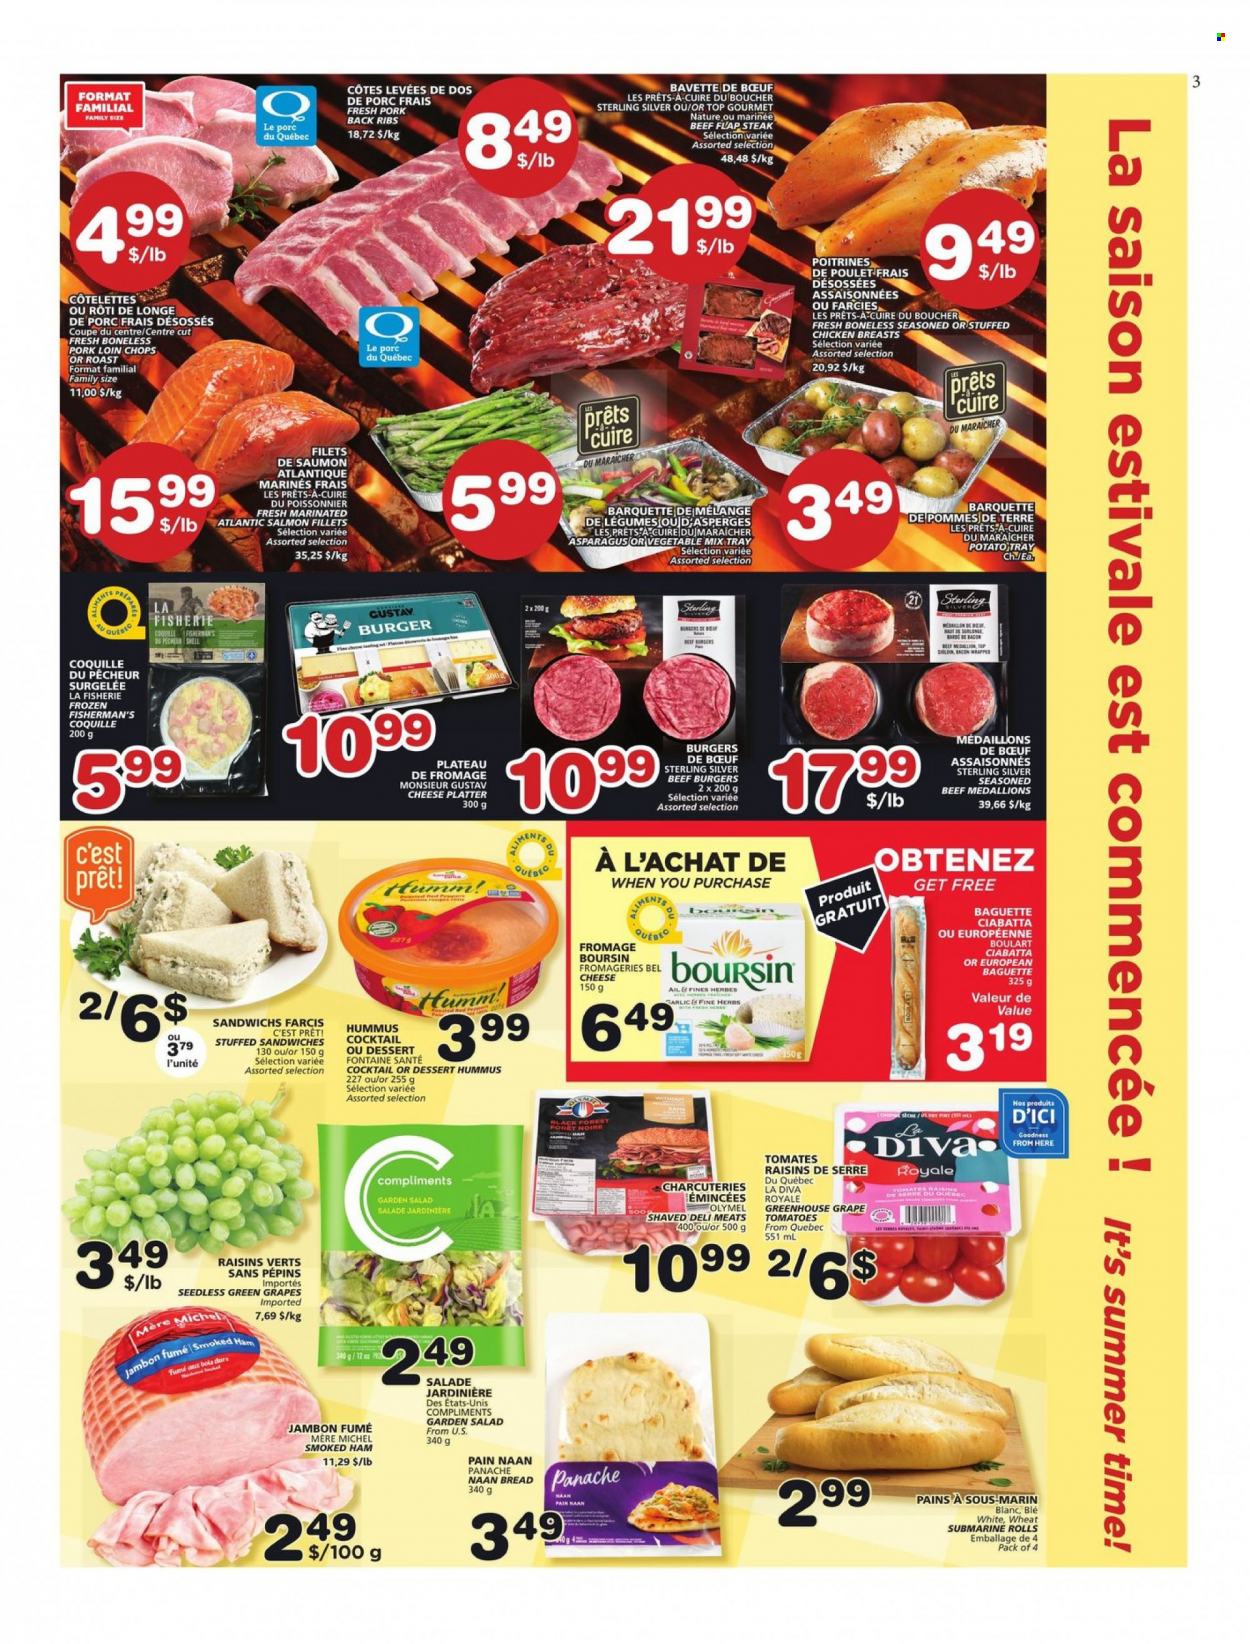 thumbnail - Les Marchés Tradition Flyer - May 19, 2022 - May 25, 2022 - Sales products - bread, tomatoes, salad, peppers, salmon, salmon fillet, sandwich, hamburger, beef burger, stuffed chicken, bacon, ham, smoked ham, hummus, cheese, dried fruit, beef meat, flap steak, pork chops, pork loin, pork meat, pork ribs, pork back ribs, baguette, ciabatta, raisins, steak. Page 3.